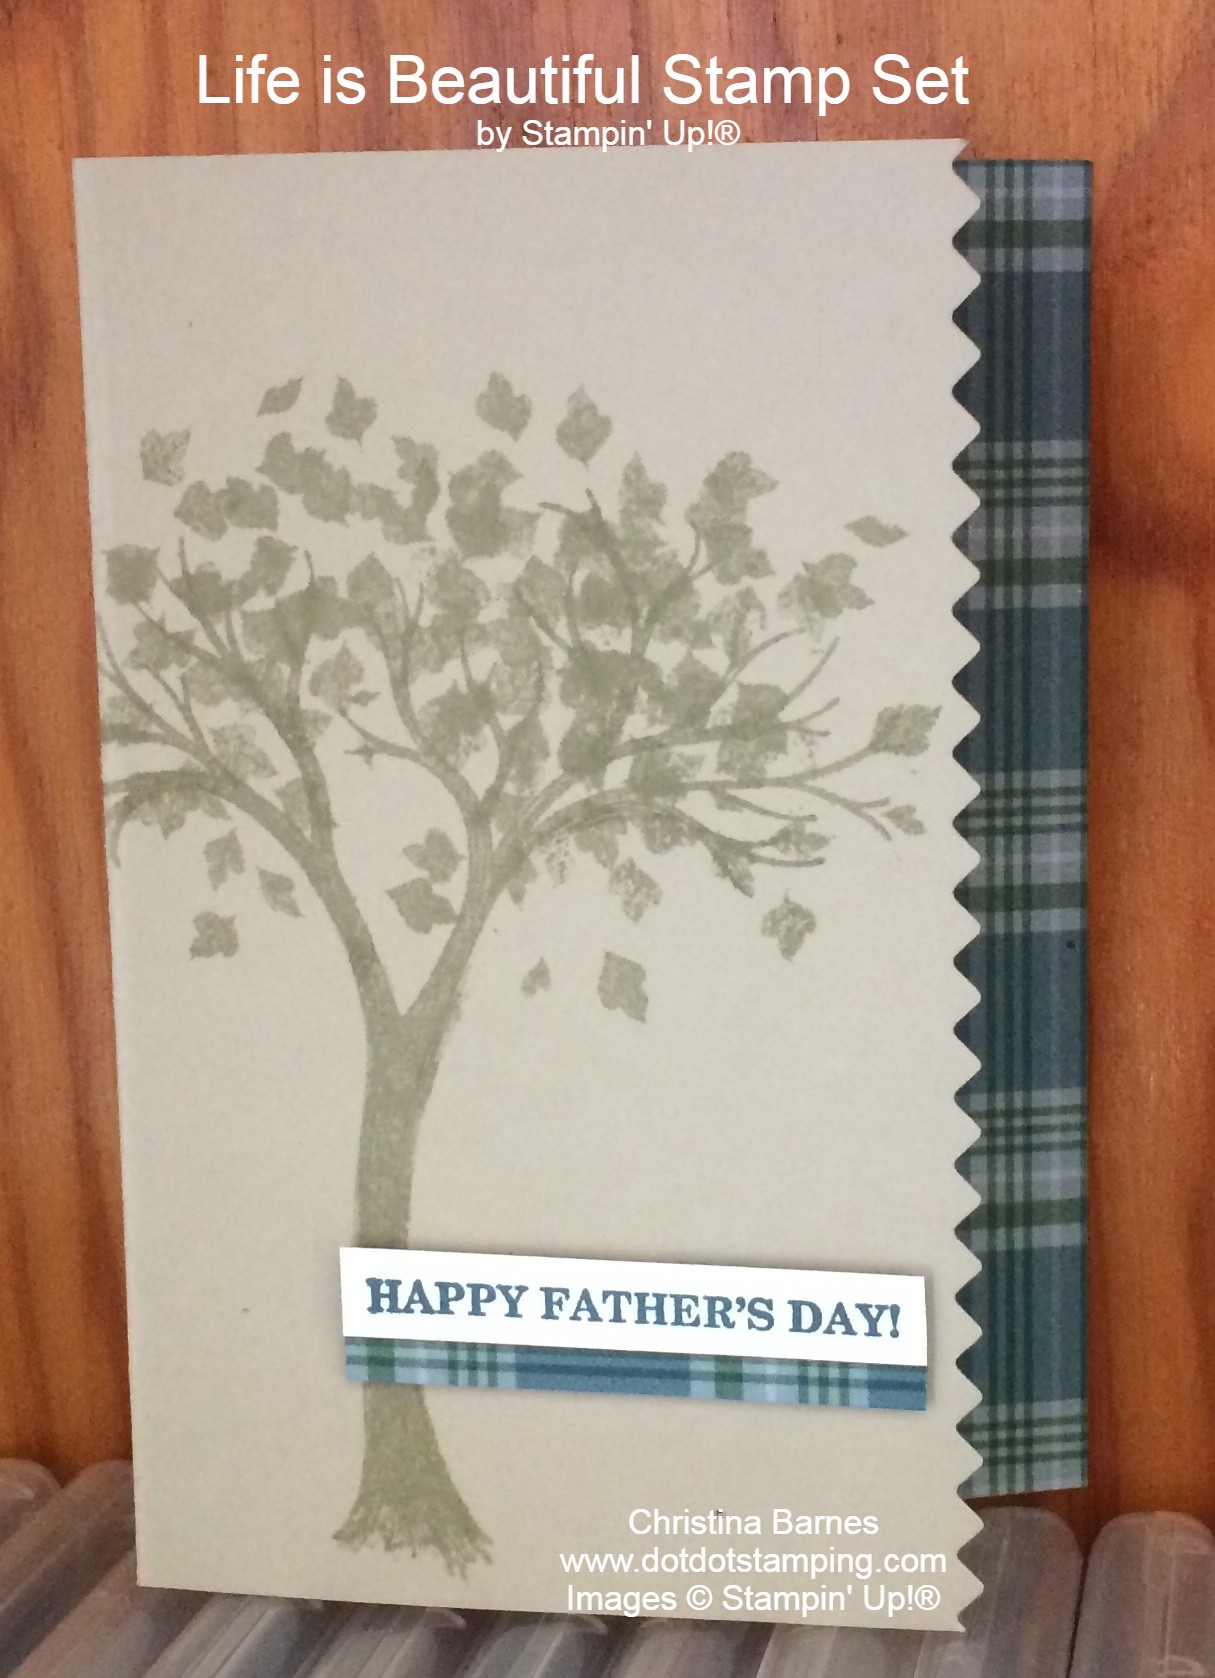 Life is Beautiful Father's Day Card 2020 Stampin' Up! Christina Barnes Dot Dot Stamping